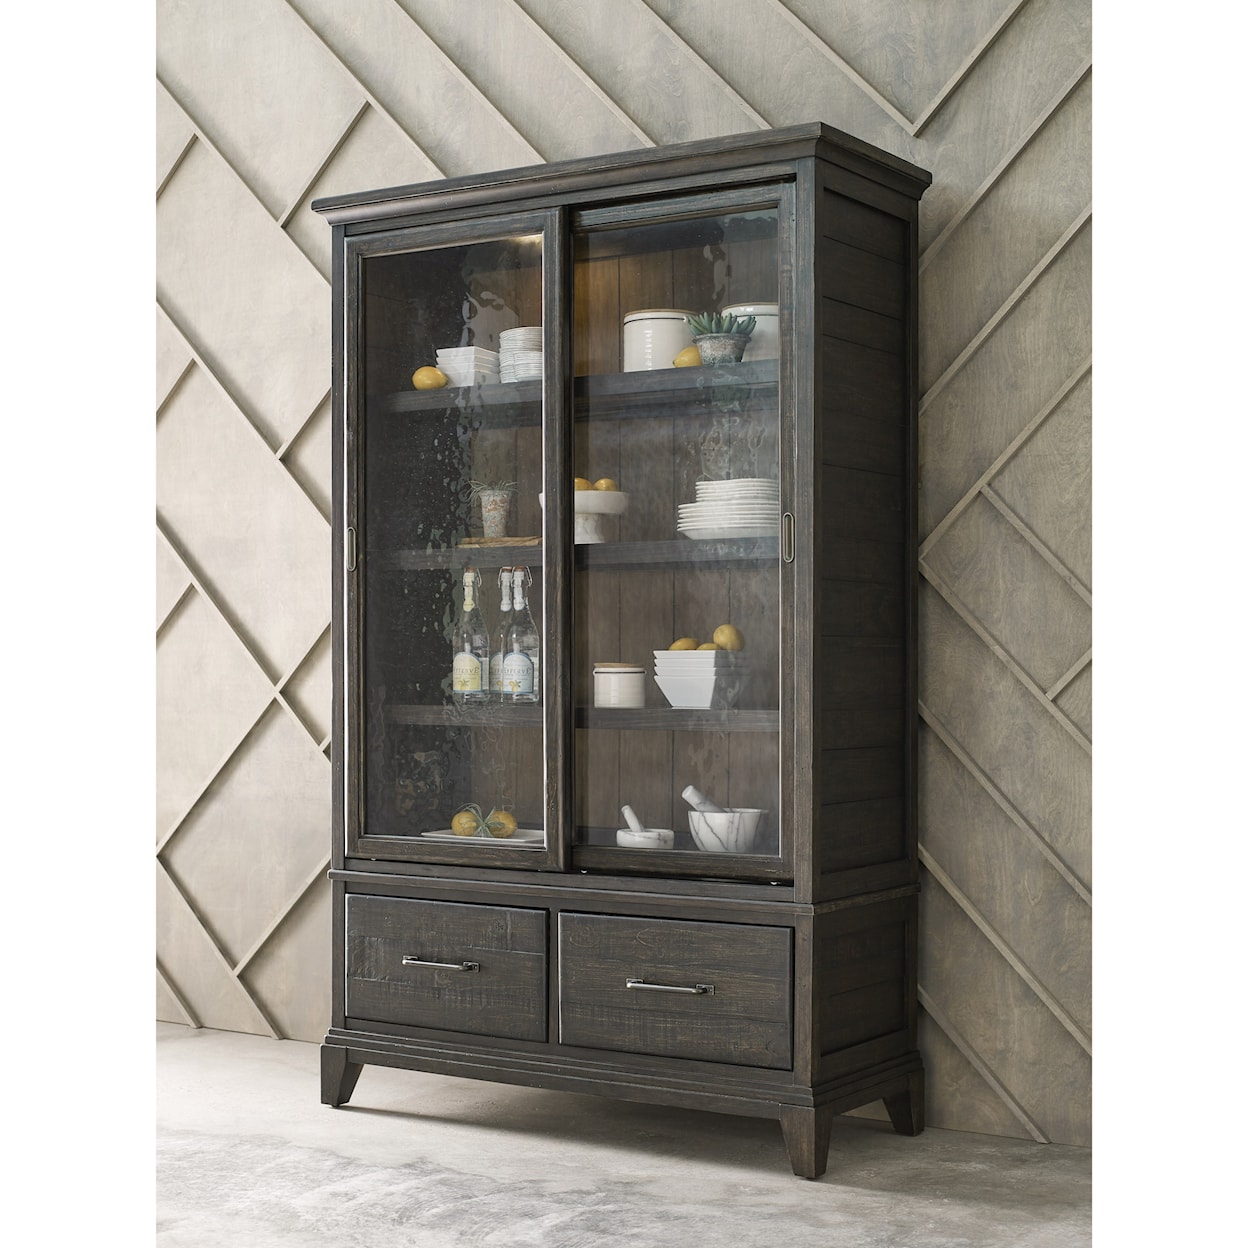 Kincaid Furniture Plank Road Darby Display Cabinet          